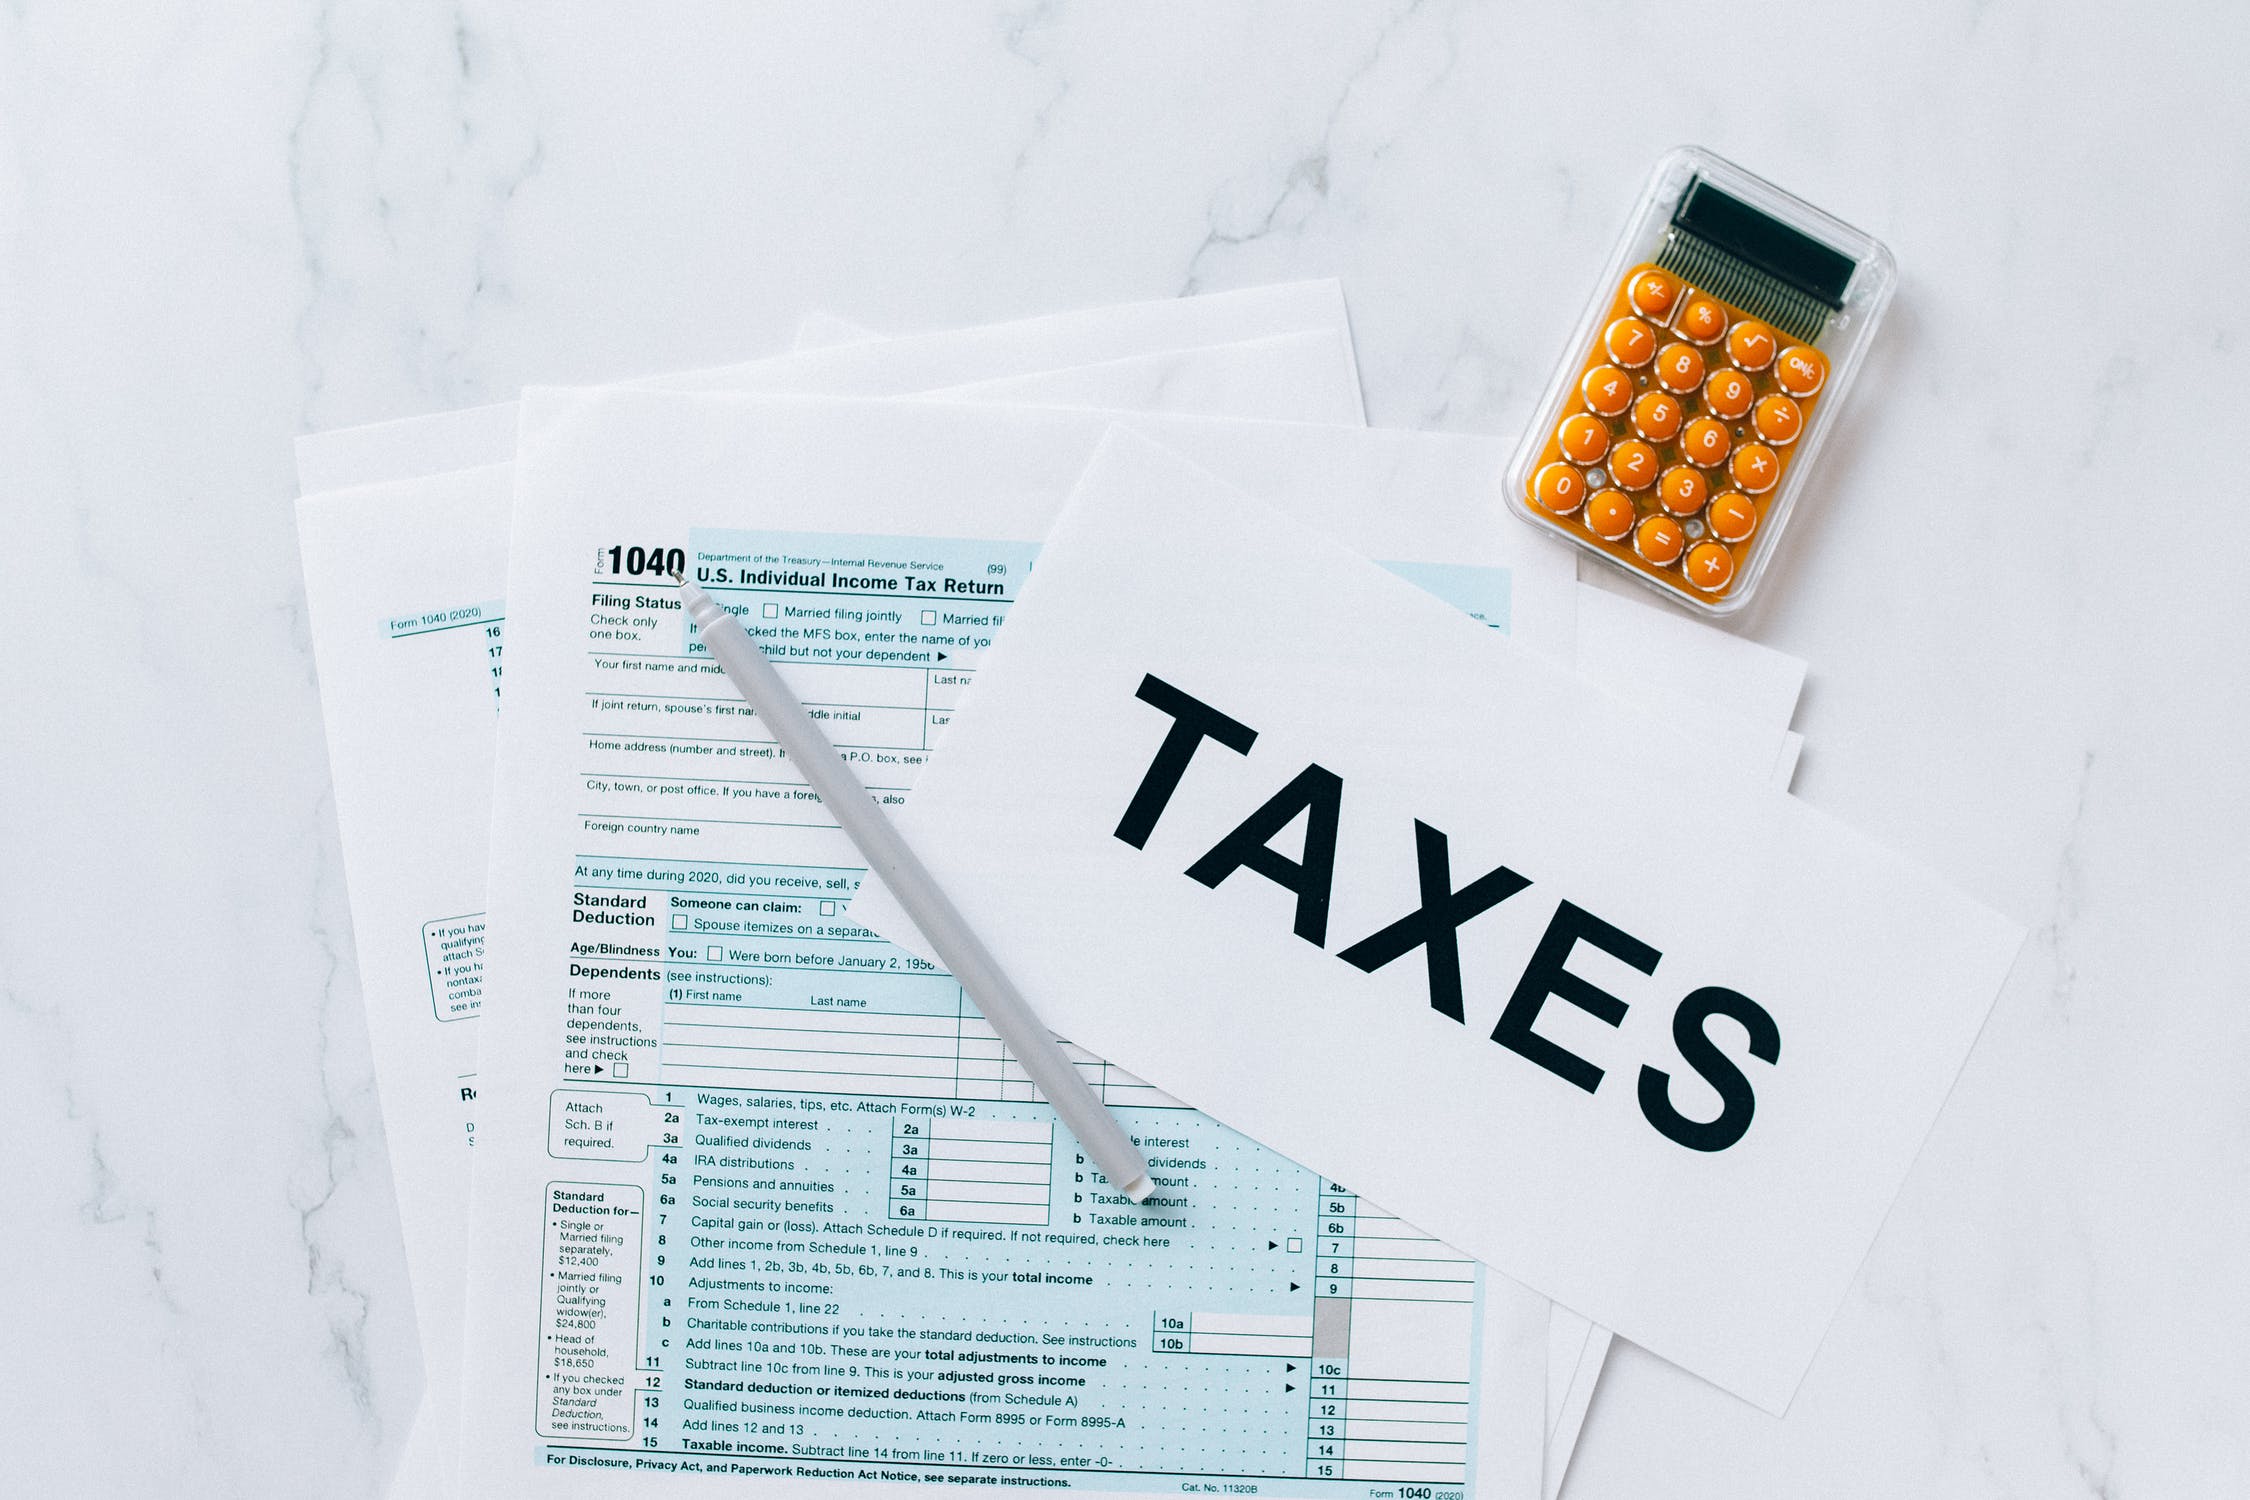 Missed Your Tax Deadline? Here Are a Few Steps You Can Take to Get Back on Track